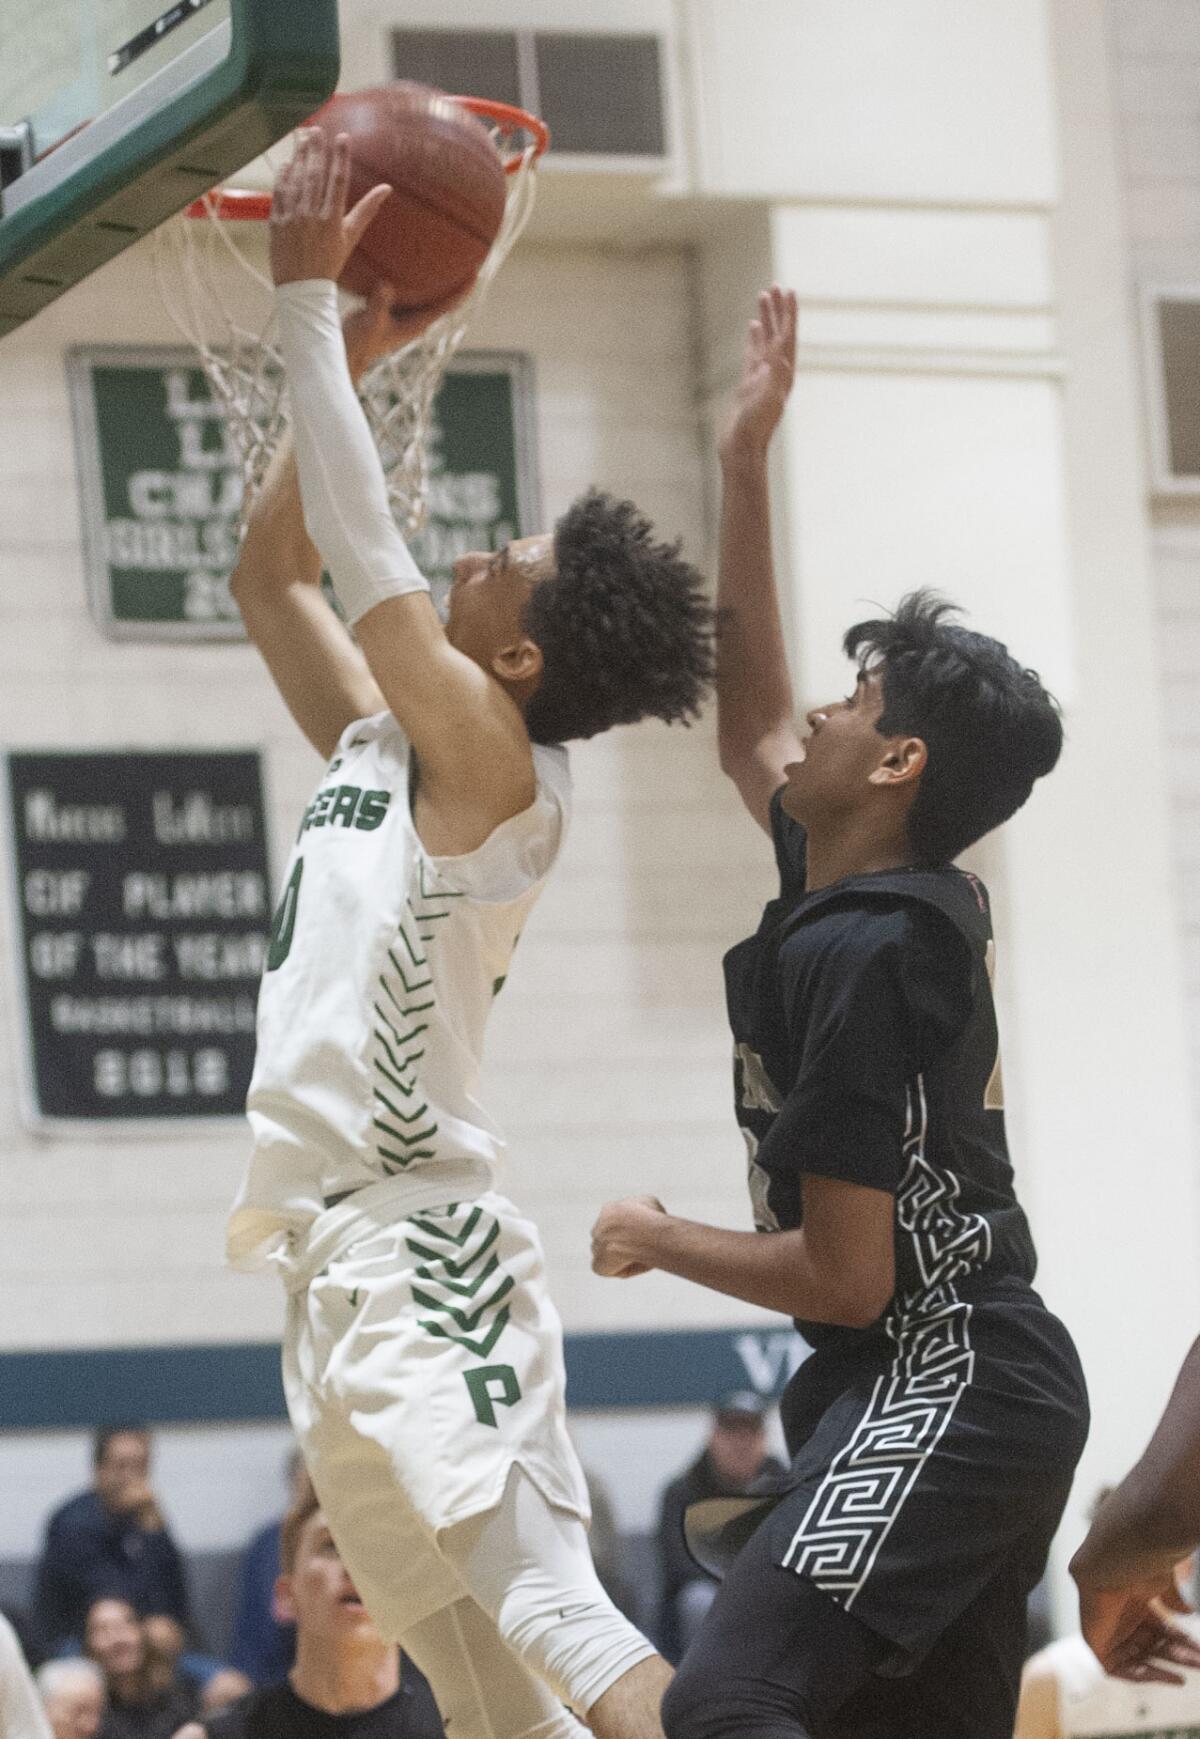 Providence’s Jordan Shelley goes to the hoop past Tustin’s Jason Naranj during Wednesday’s CIF Southern Section Division III-AA first-round playoff game at Providence. (Photo by Miguel Vasconcellos)